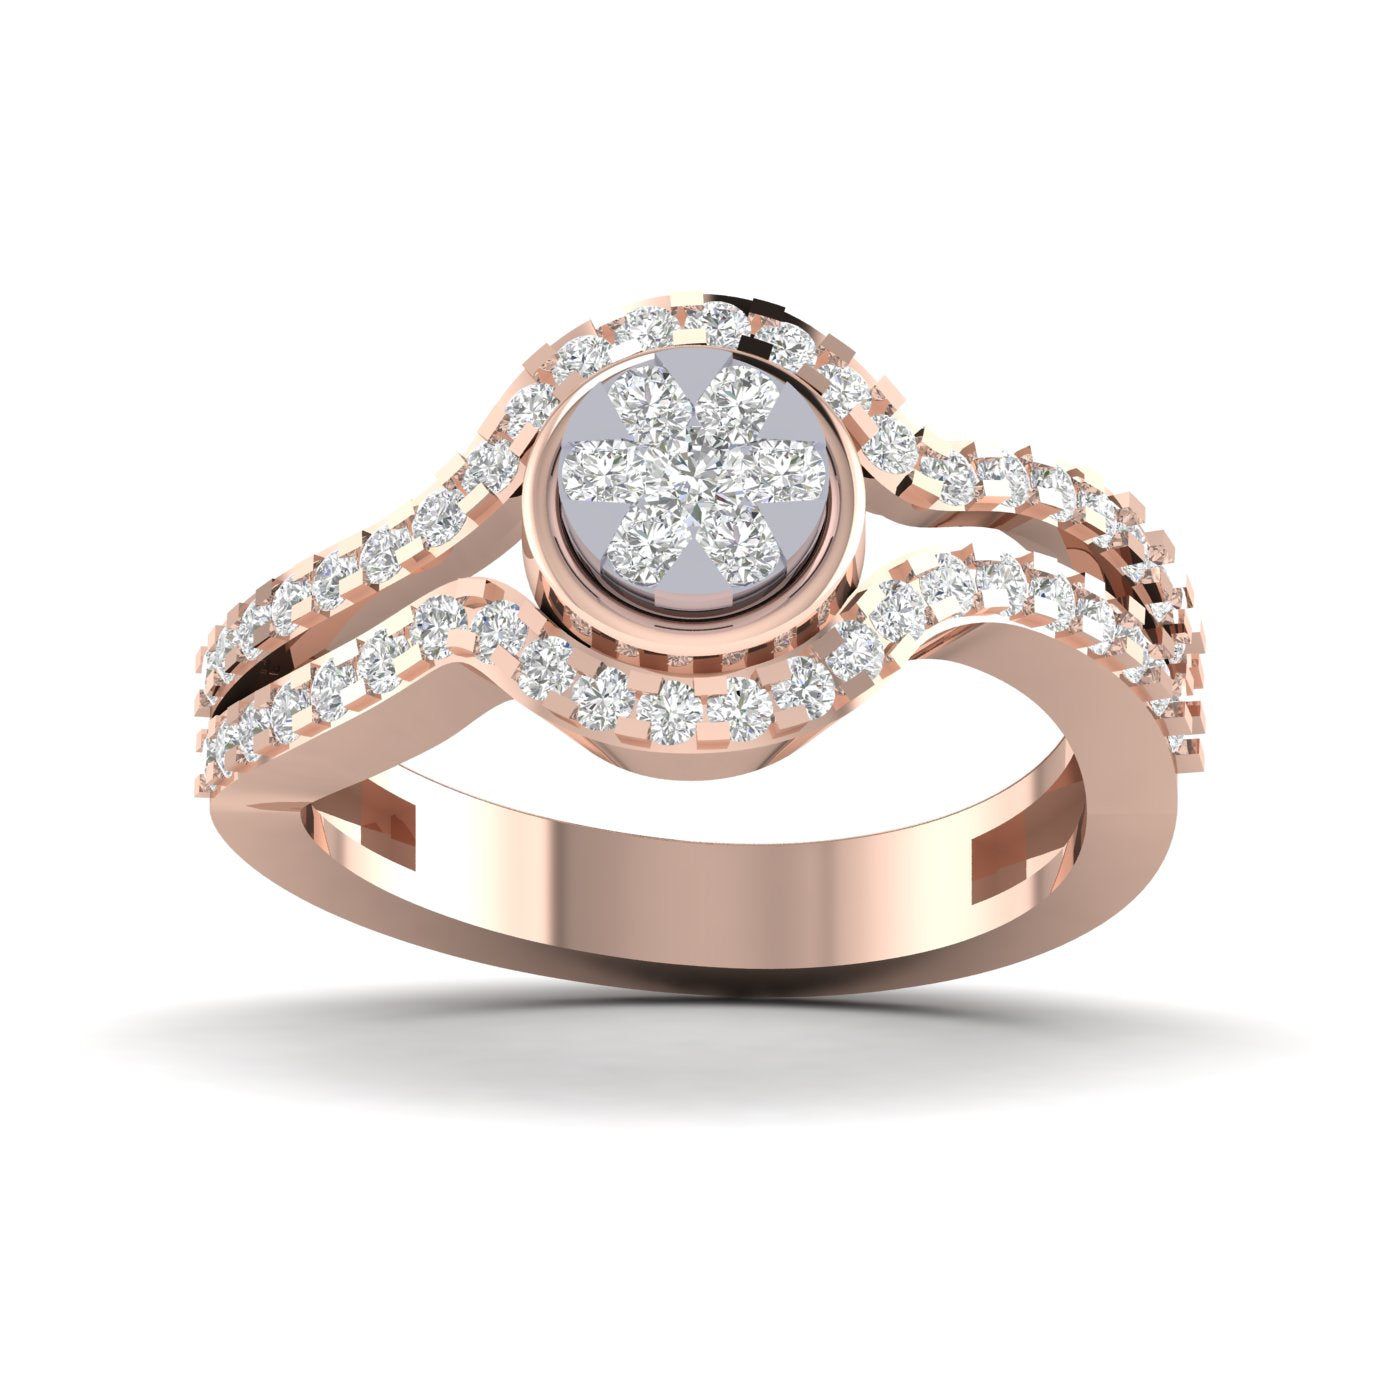 Glimmering Floral Diamond Ring